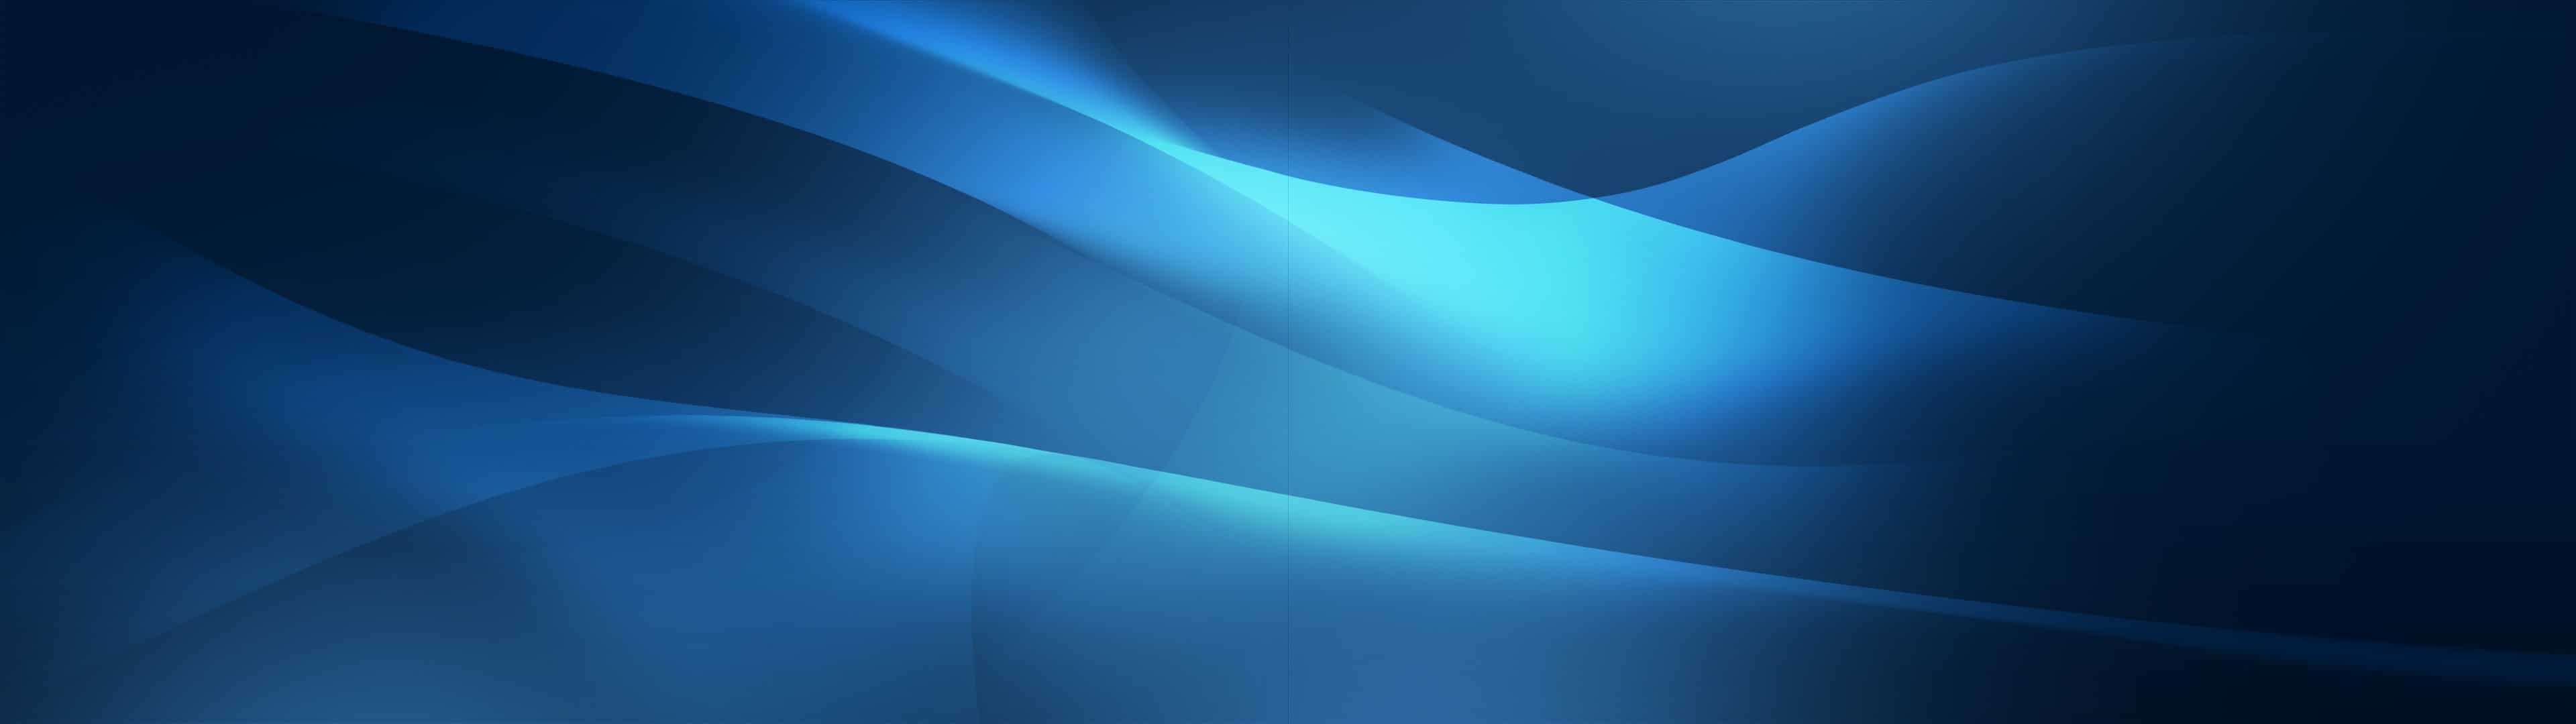 3840X1080 Blue Wallpapers